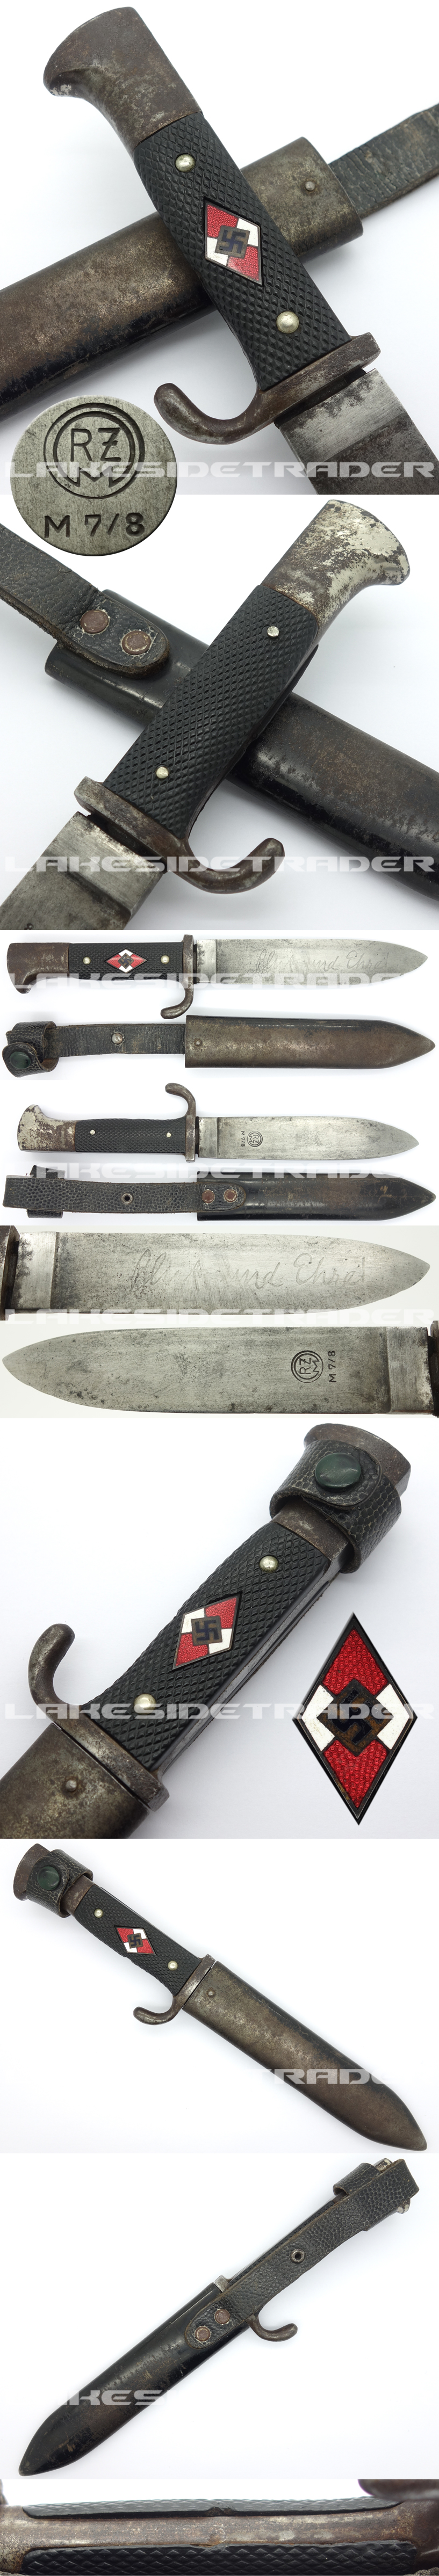 Transitional Hitler Youth Knife by Eduard Gembruch